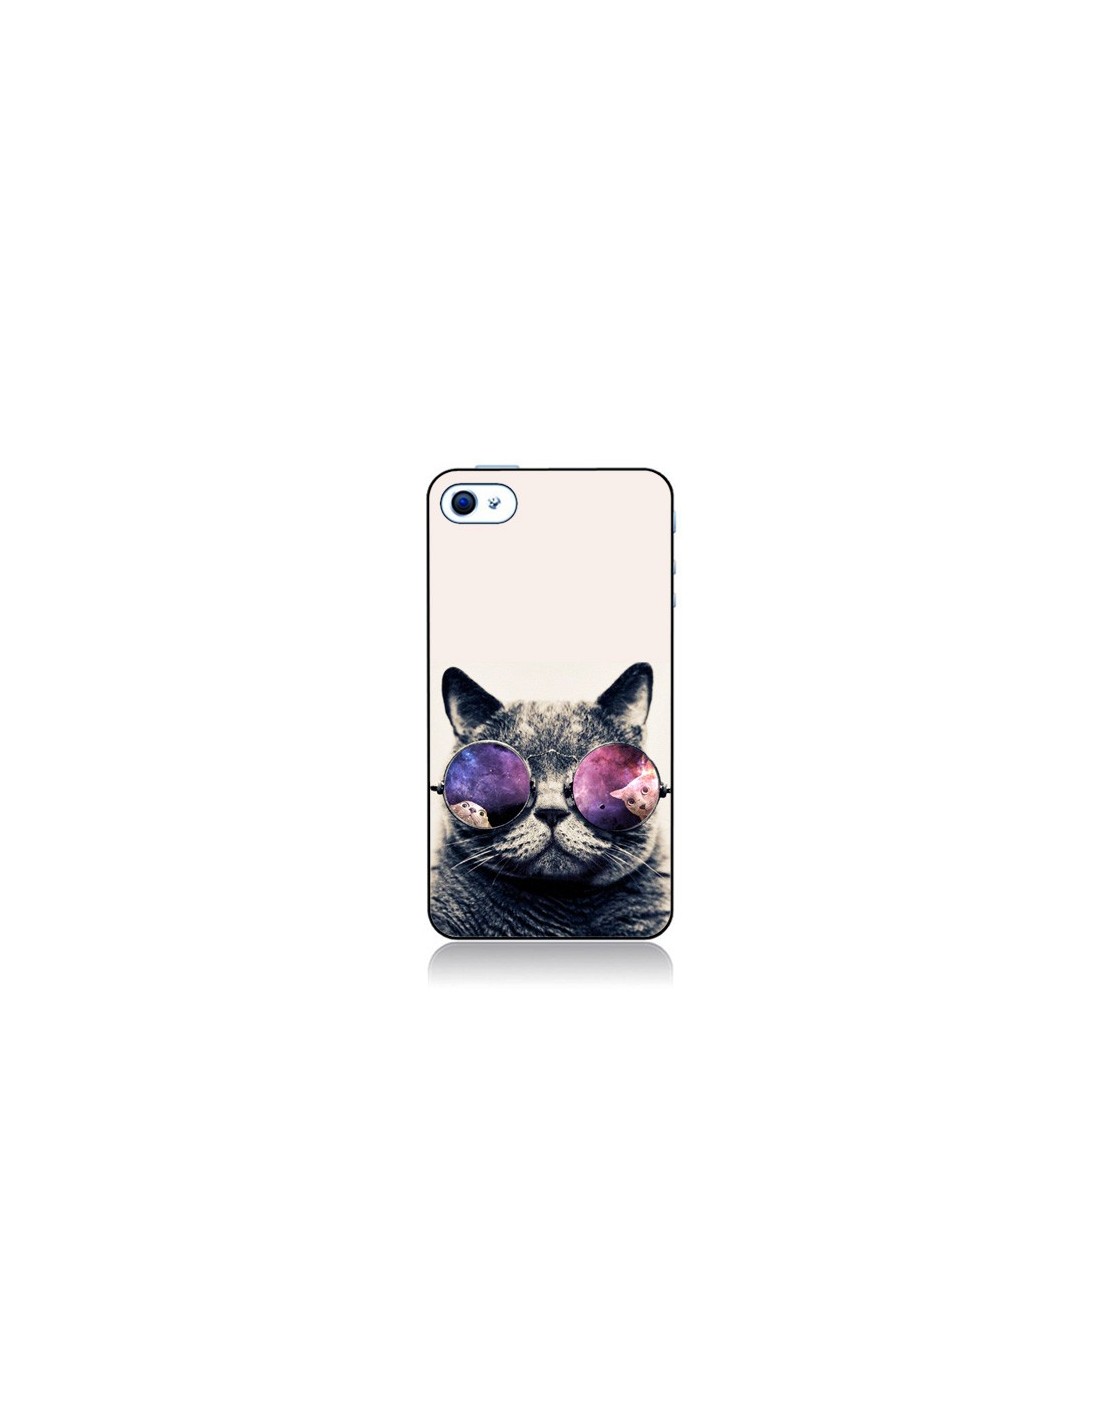 coque chat iphone 4